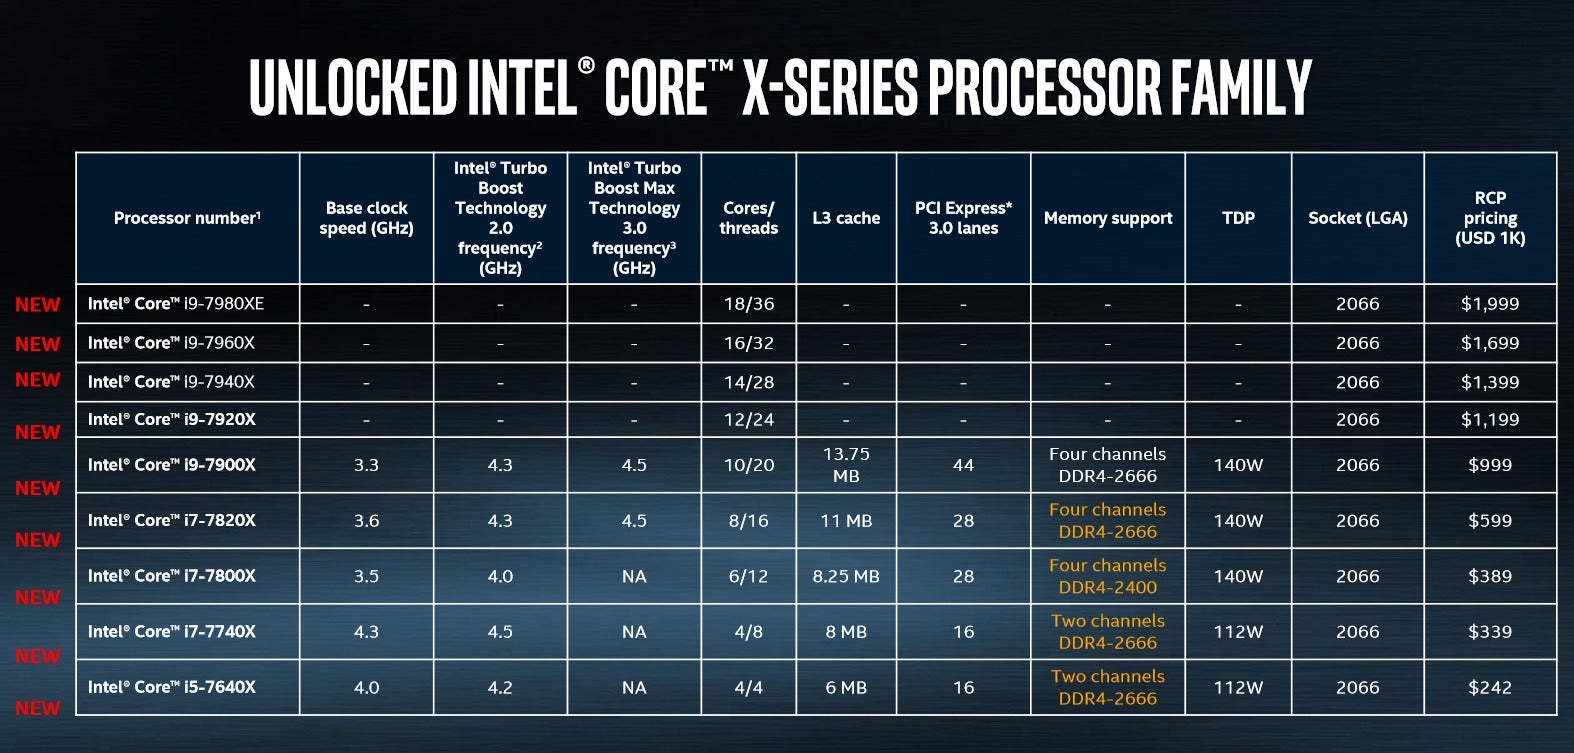 [CPU] Intel new flagship I9-7980XE CPU will contains 18 CORES / 36